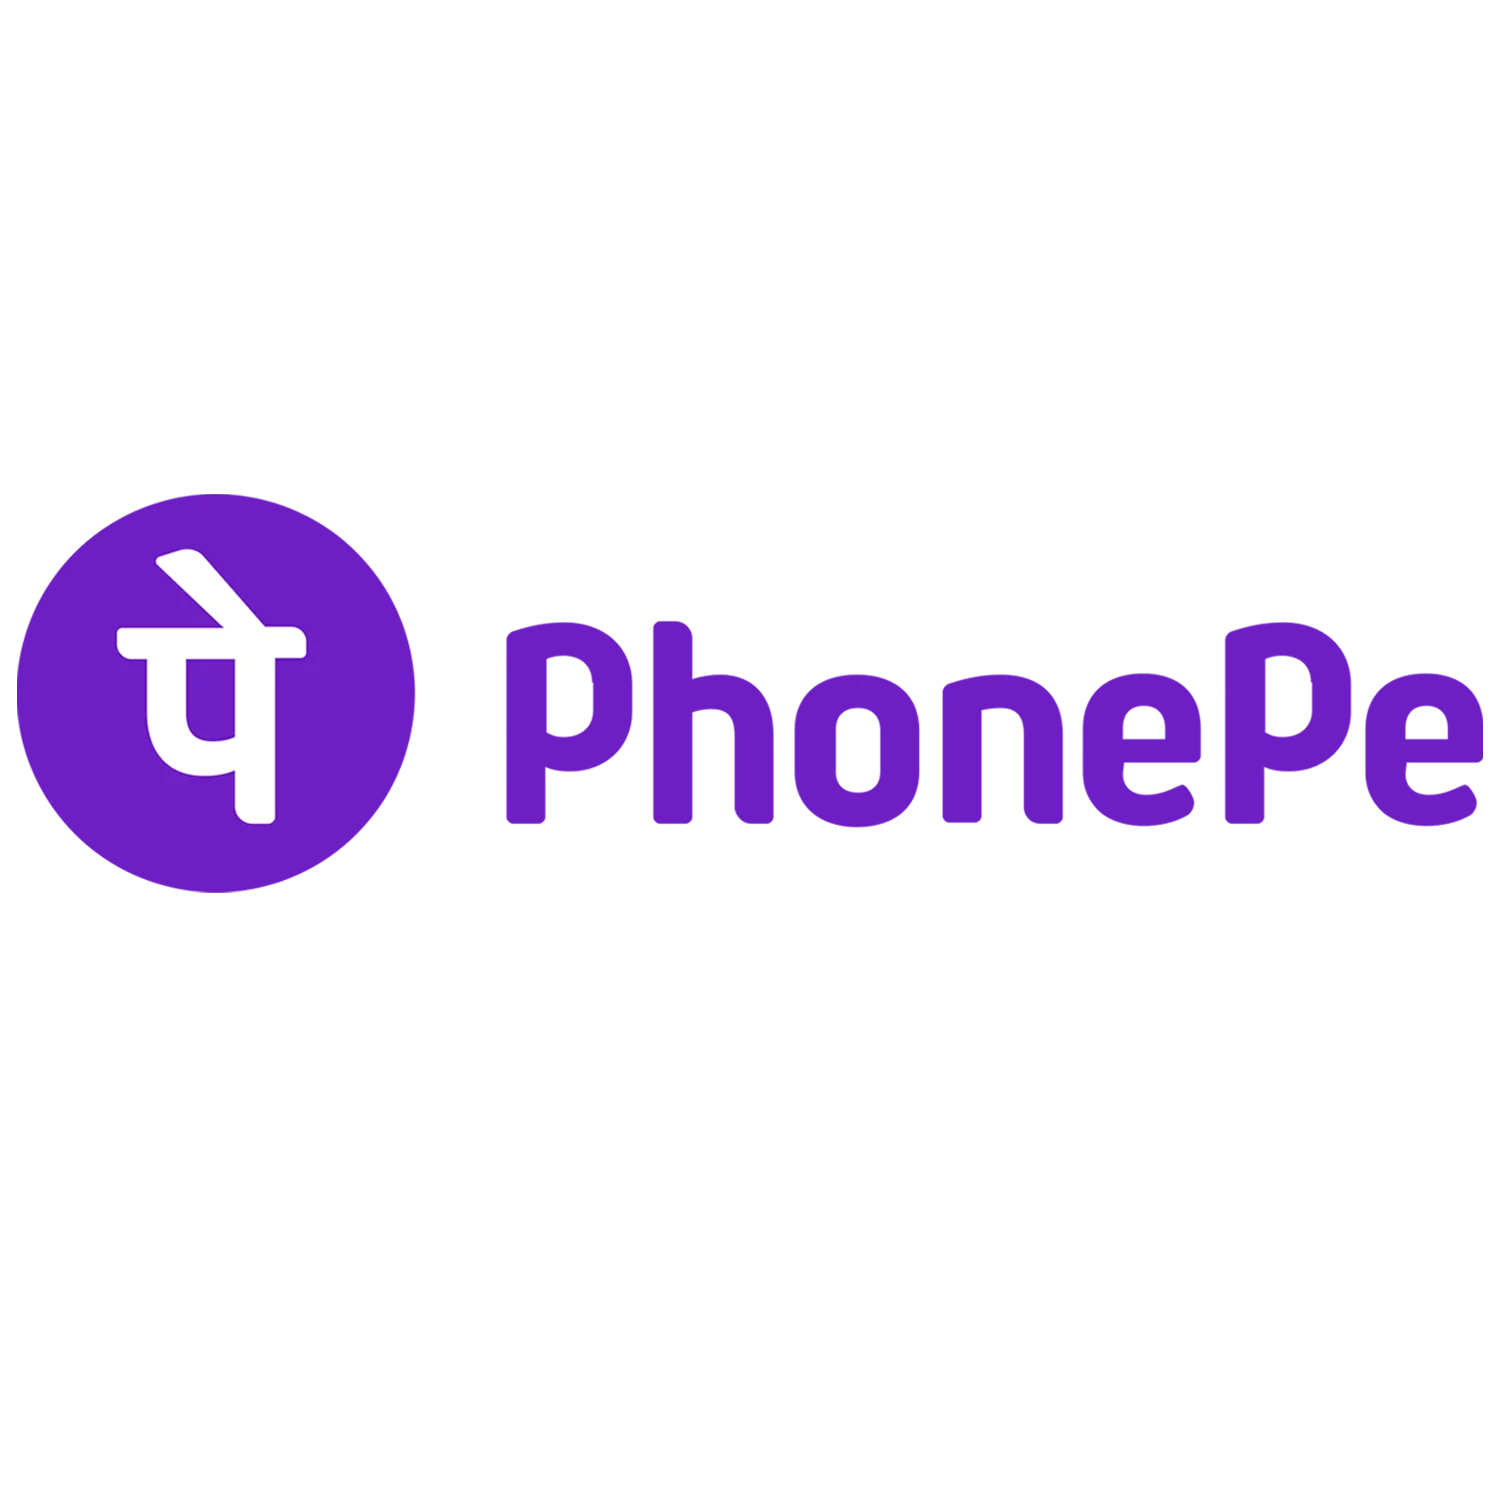 Learn more about using PhonePe as a payment method.